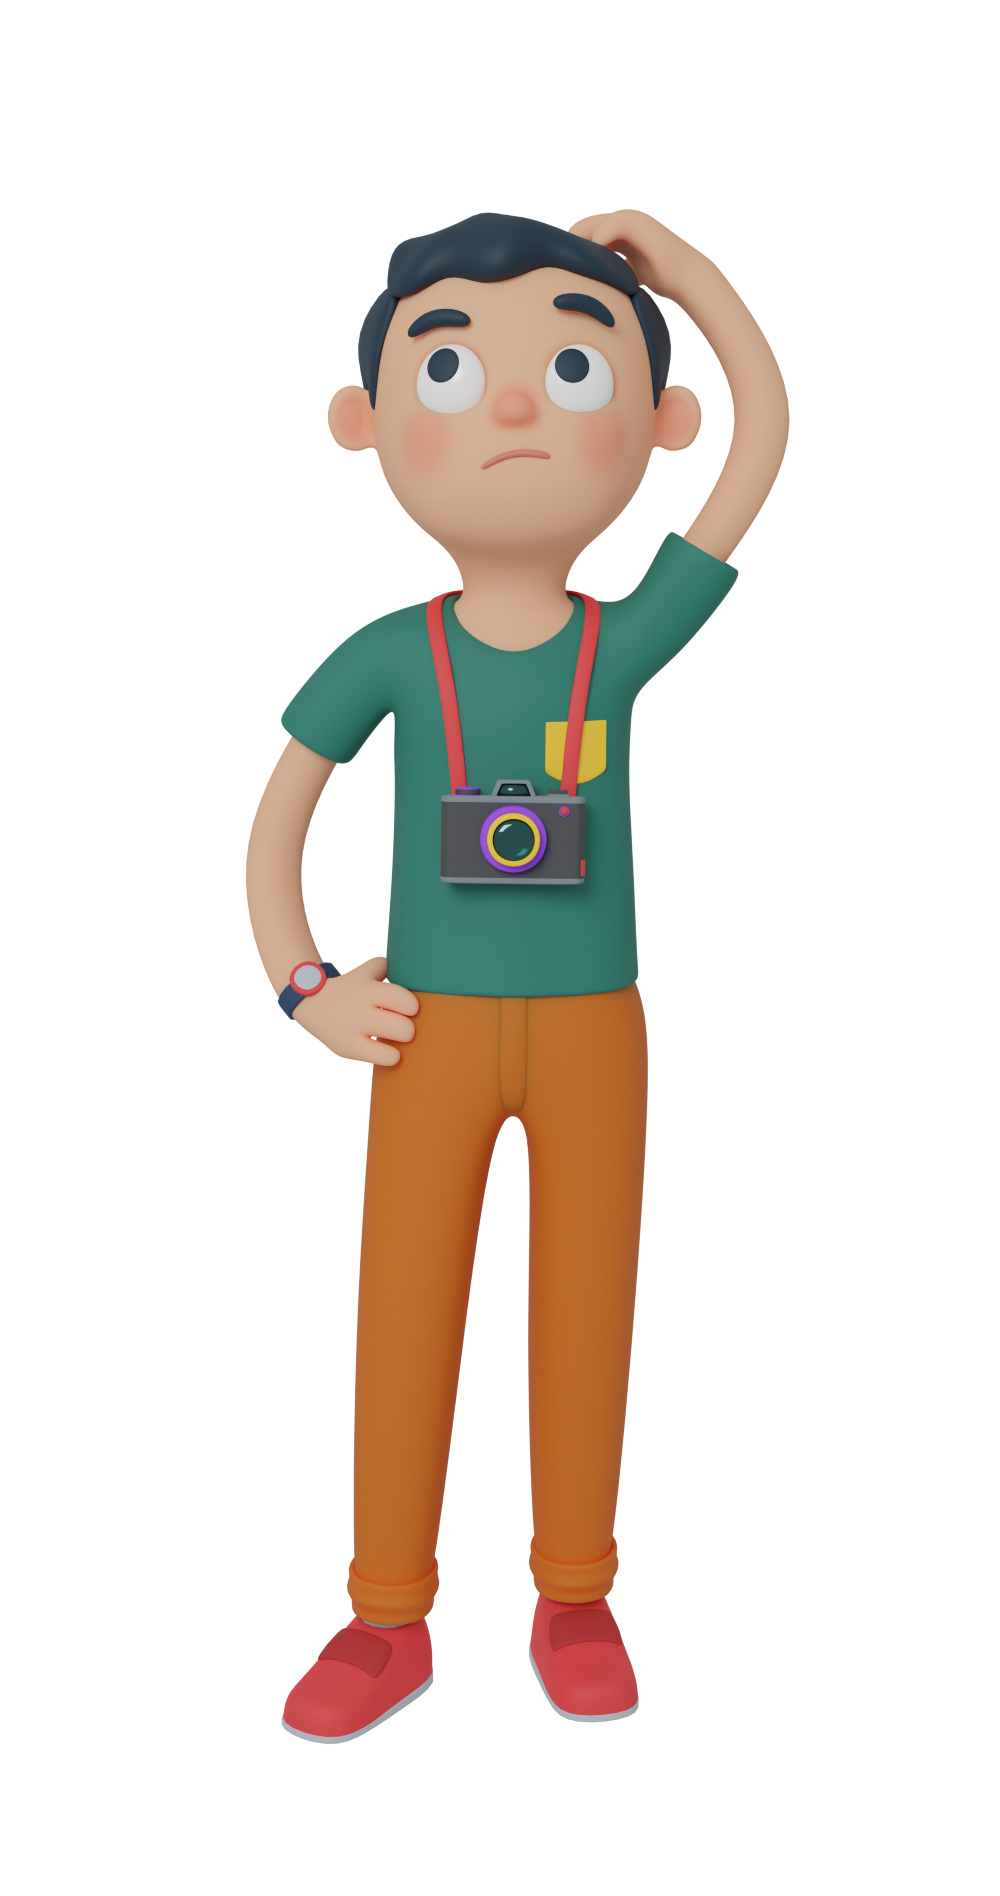 3d character design of a man doing a thinking gesture